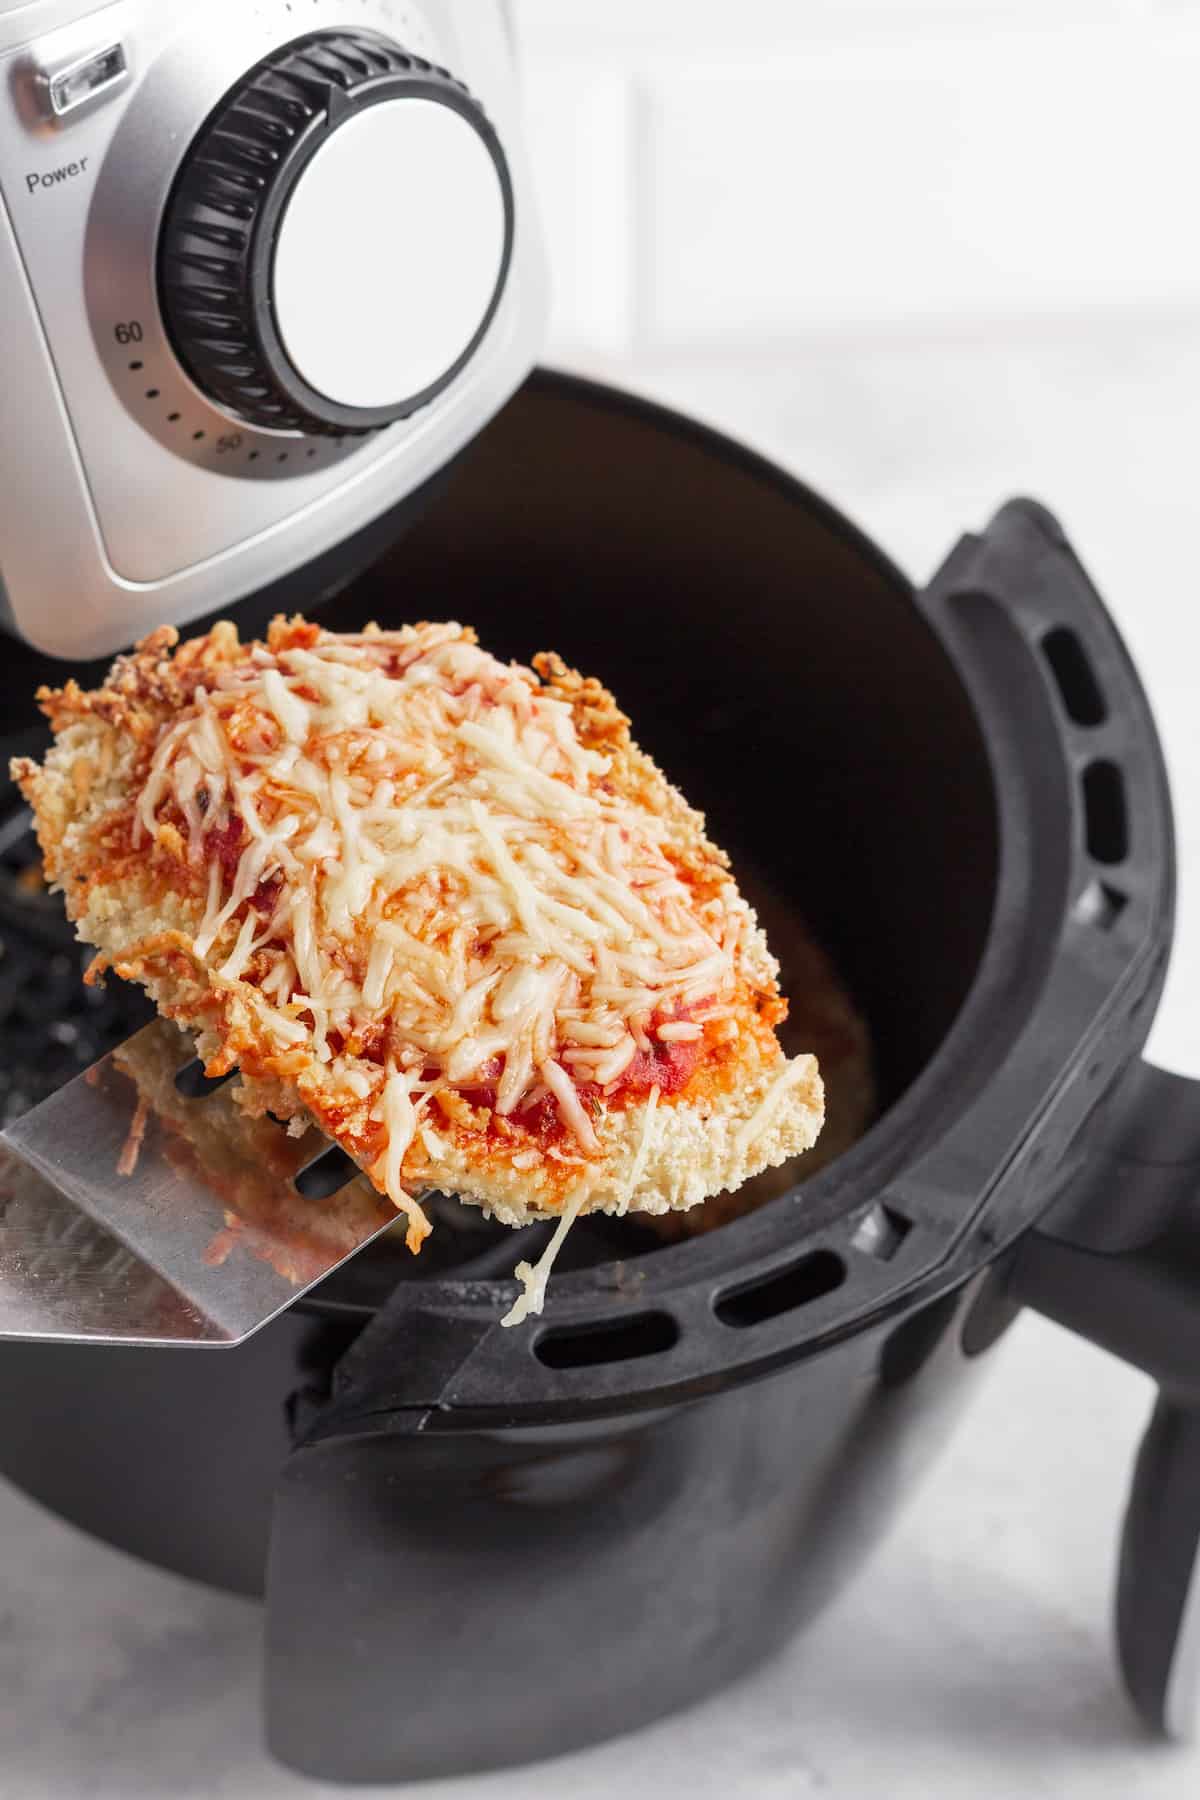 A Piece of Chicken Parm on a Metal Spatula Hovering Above an Air Fryer Basket